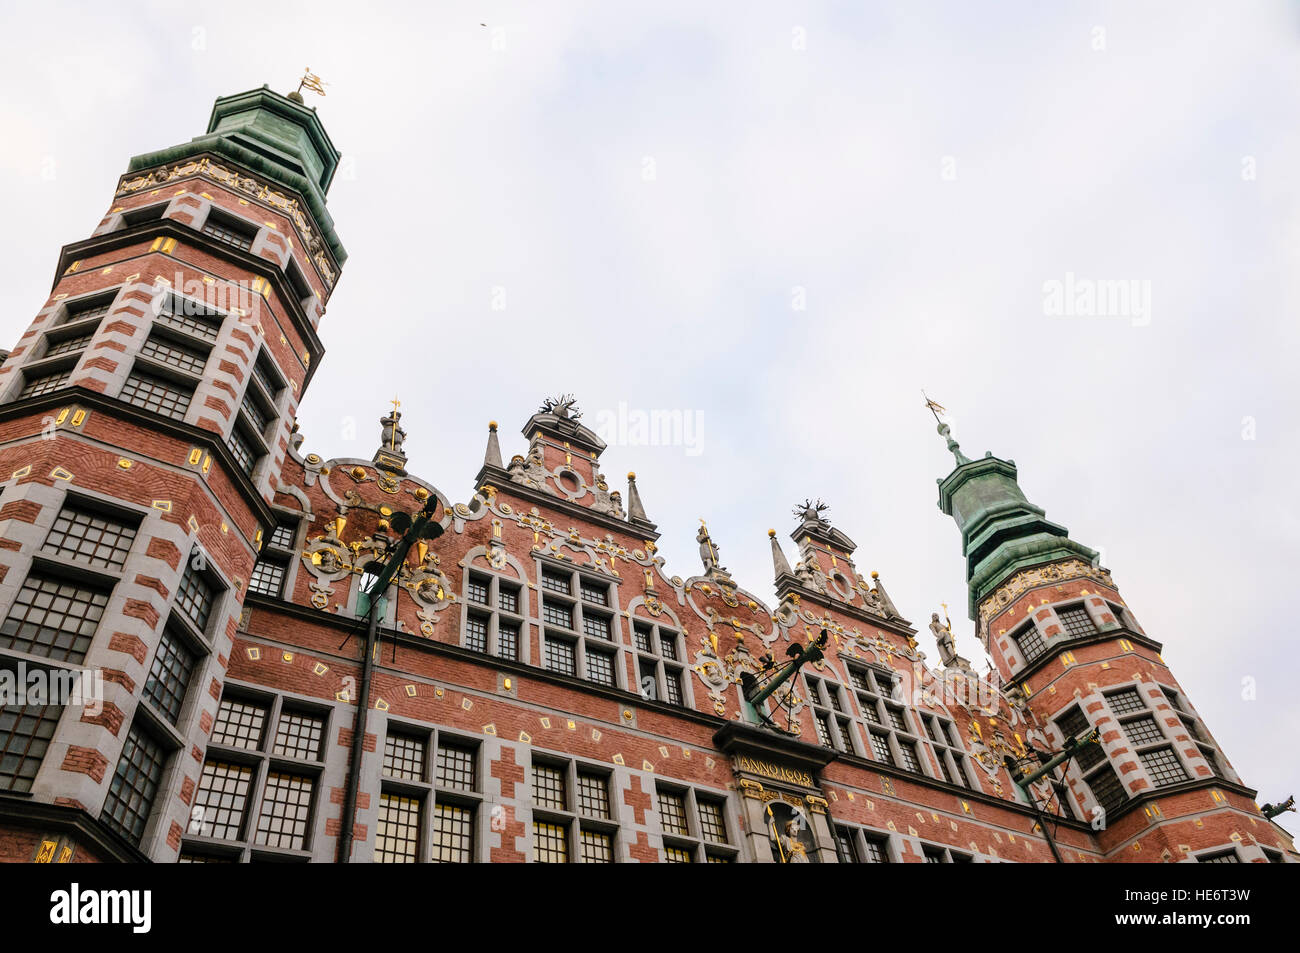 Great Armoury (Wielka Zbrojownia), Gdansk, with a fully restored pink facade with guilded detail. Stock Photo